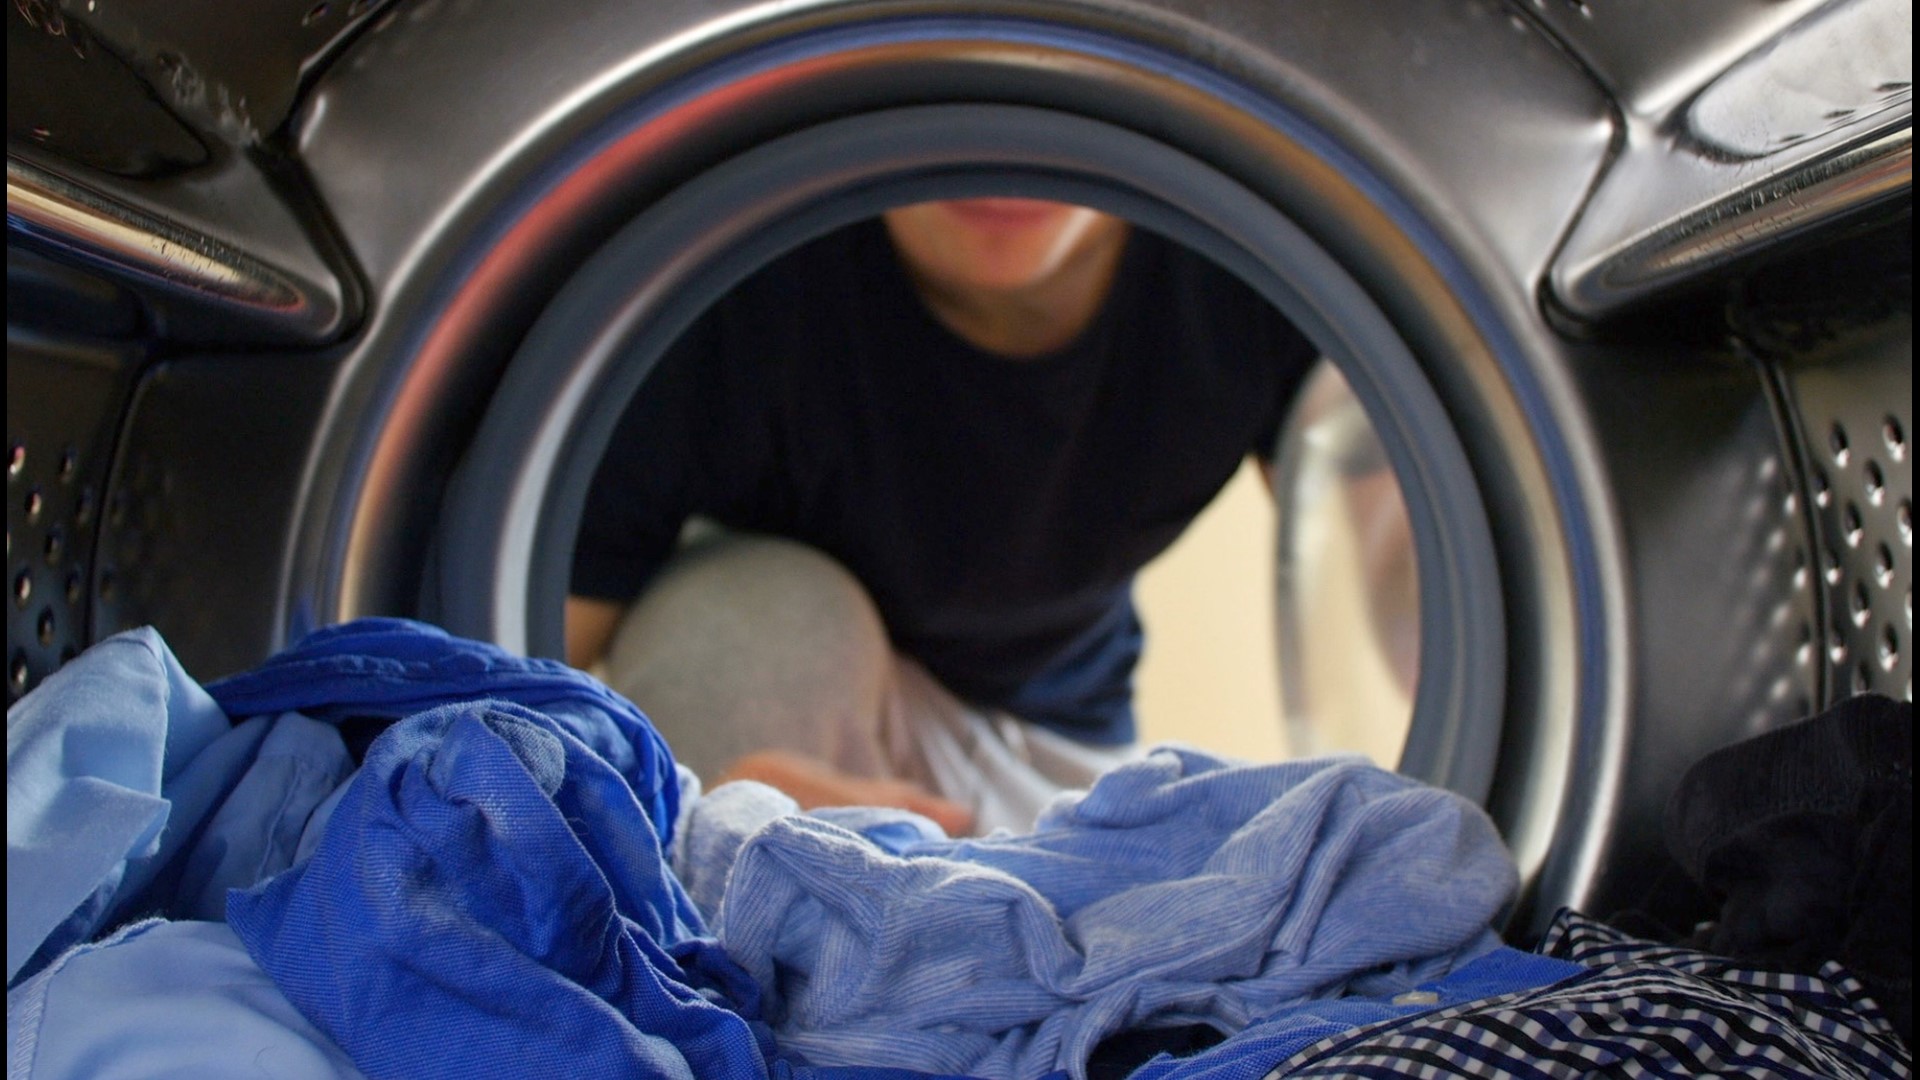 Laundry, easily one of the most annoying chores at home, but would you feel that way about it if the clothes actually came out looking new? Buzz60's Maria Mercedes Galuppo has more.